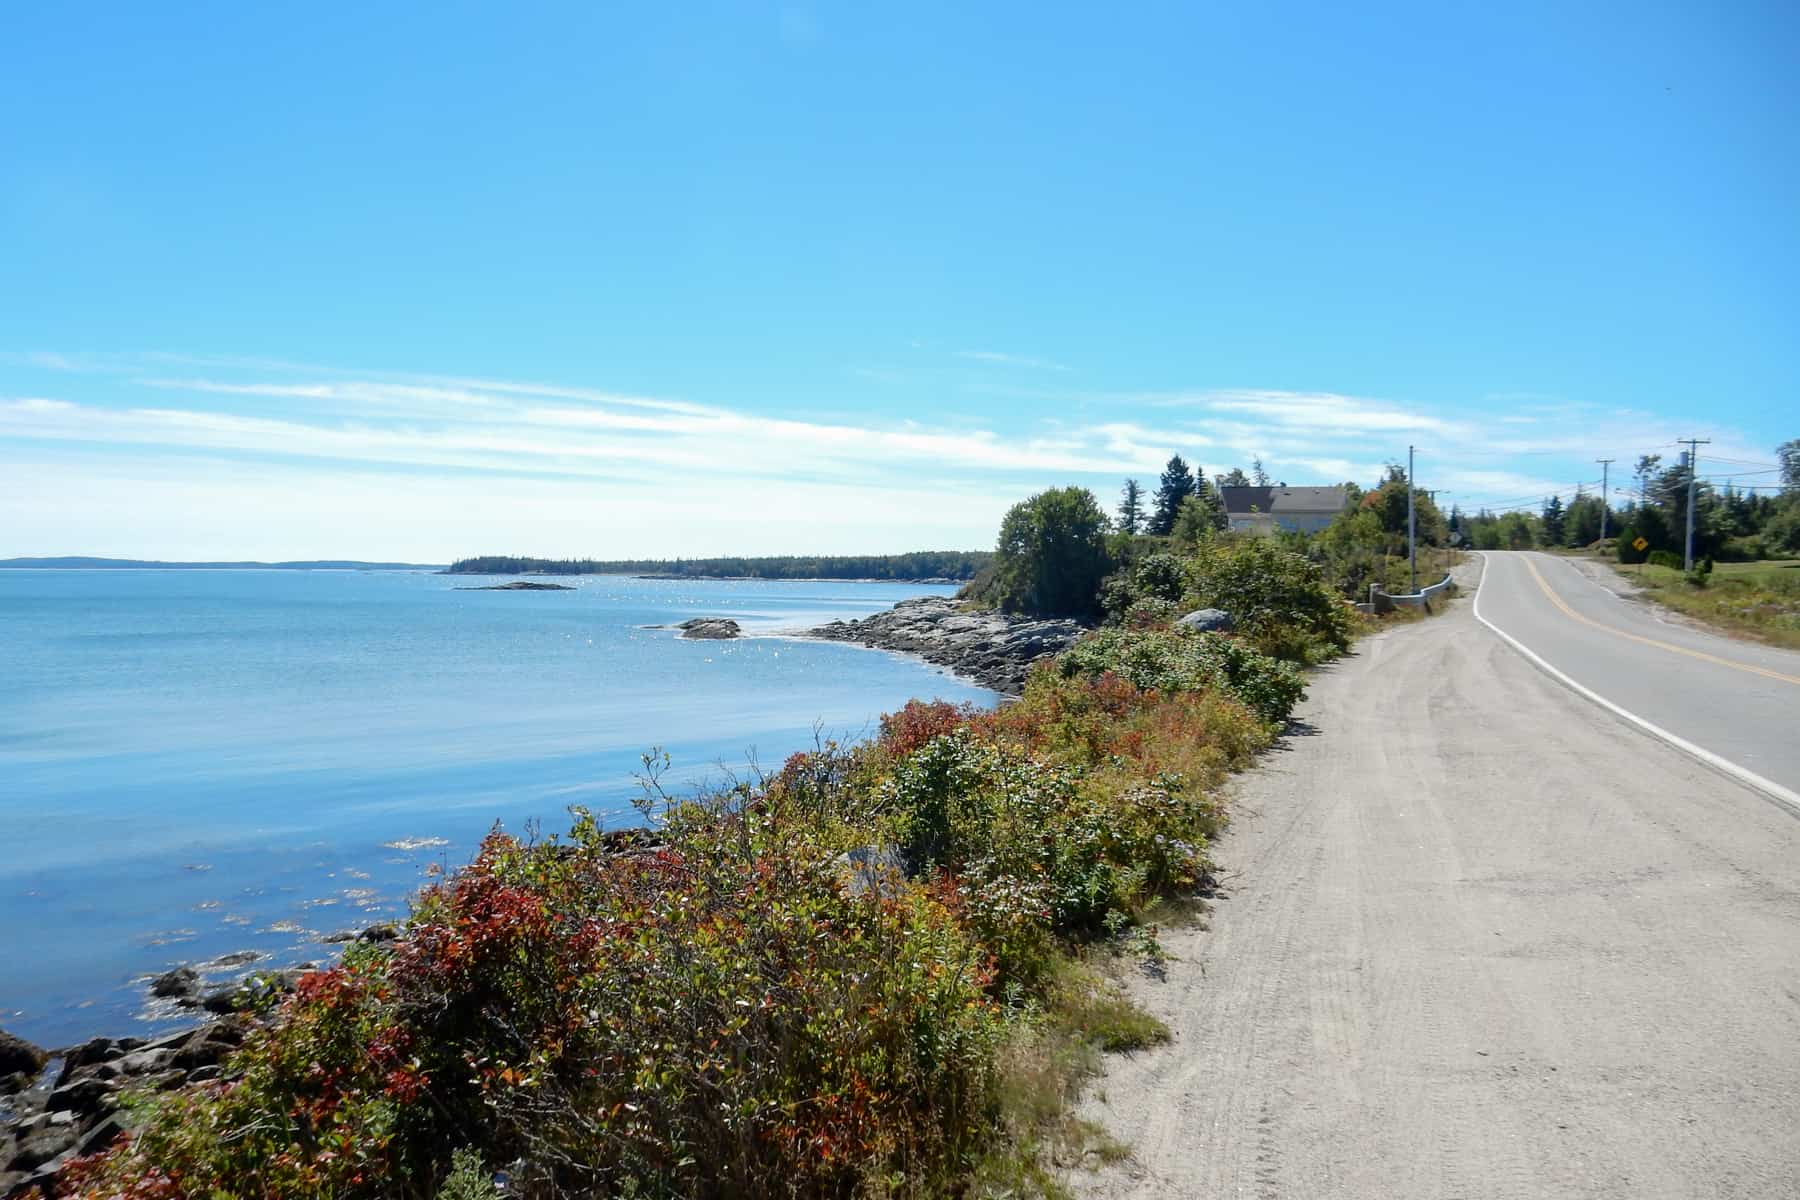 A long road lined with green and red foliage runs alongside the wide ocean - know as the Route 187 Bold Coast Scenic Byway in Maine. 